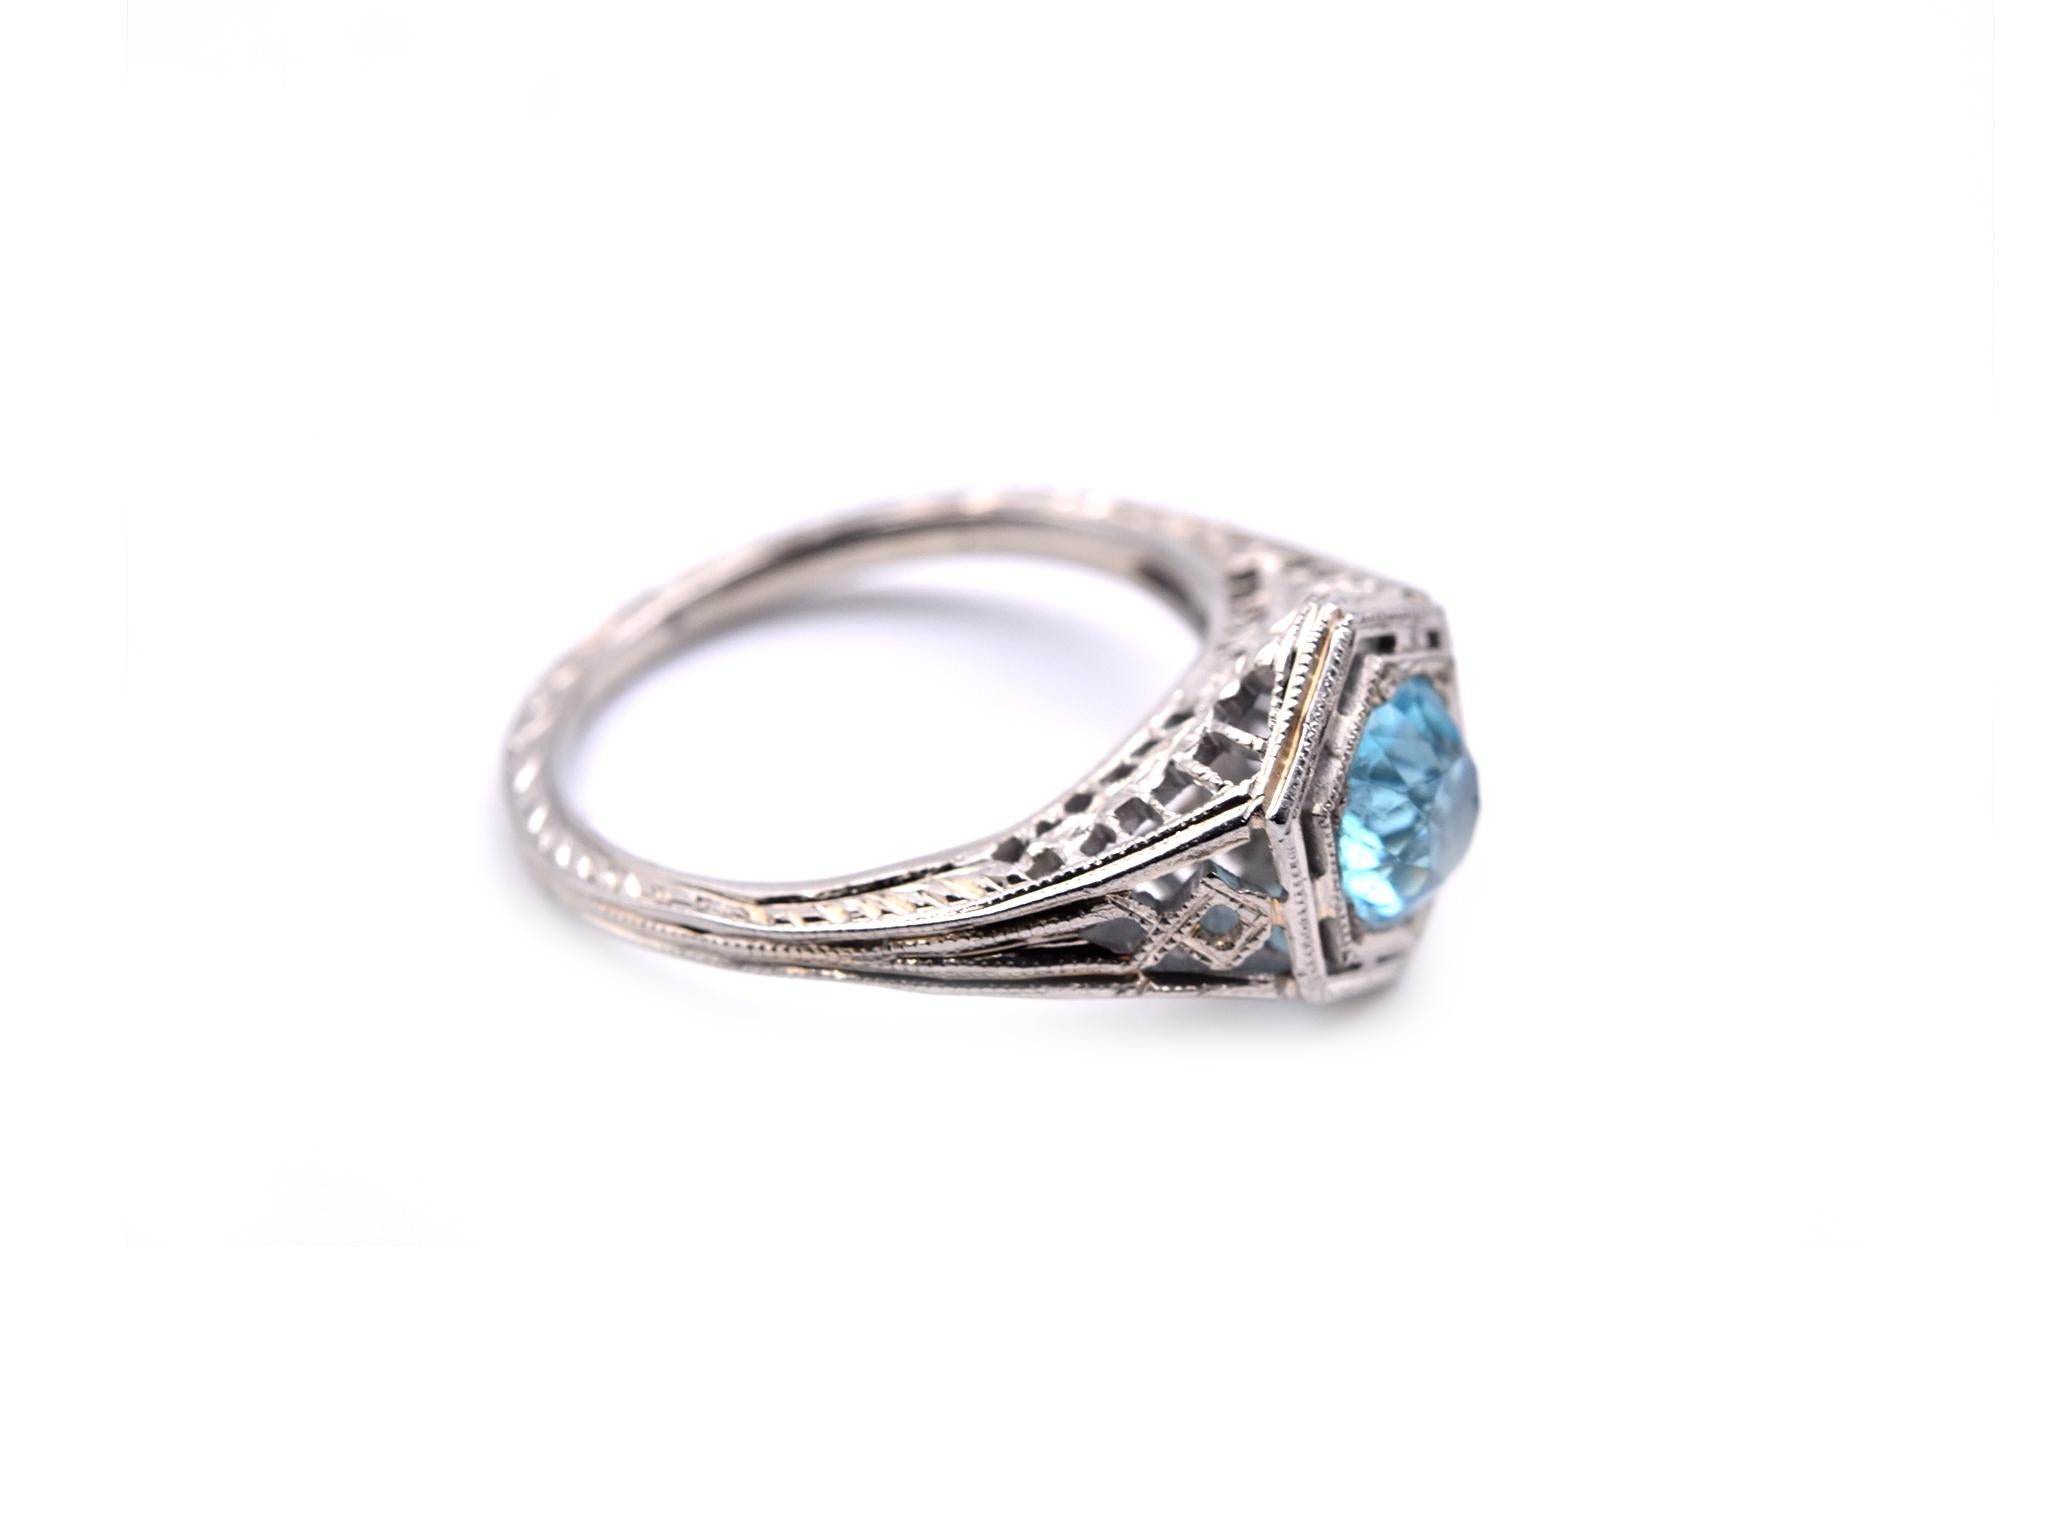 Designer: custom design
Material: 18k white gold
Blue Zircon: one blue zircon=0.85ct
Ring size: 3 ¾ (please allow two additional shipping days for sizing requests)
Dimensions: ring is approximately 9.56mm by 7.88mm
Weight: 2.44 grams
